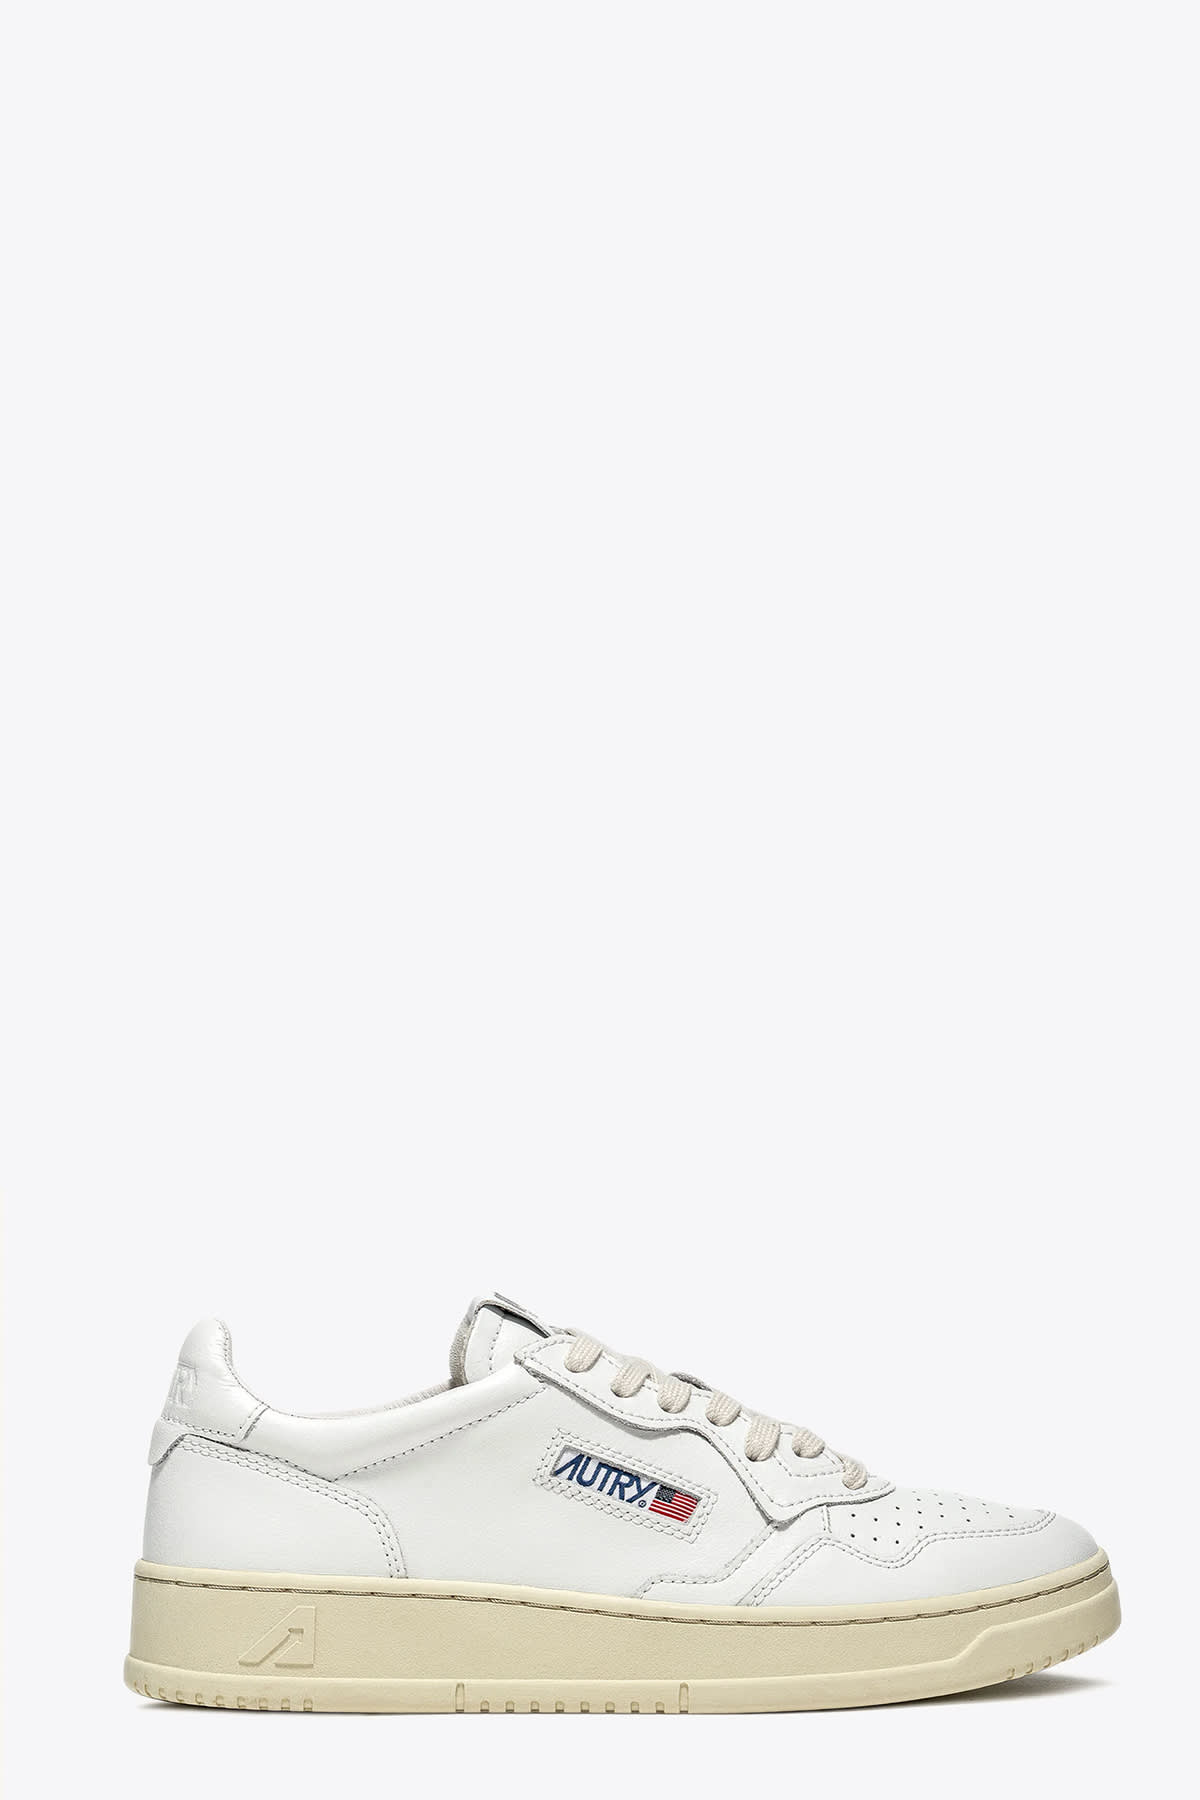 Autry 01 Low Man Leat/leat White leather low sneakers - Medalist low